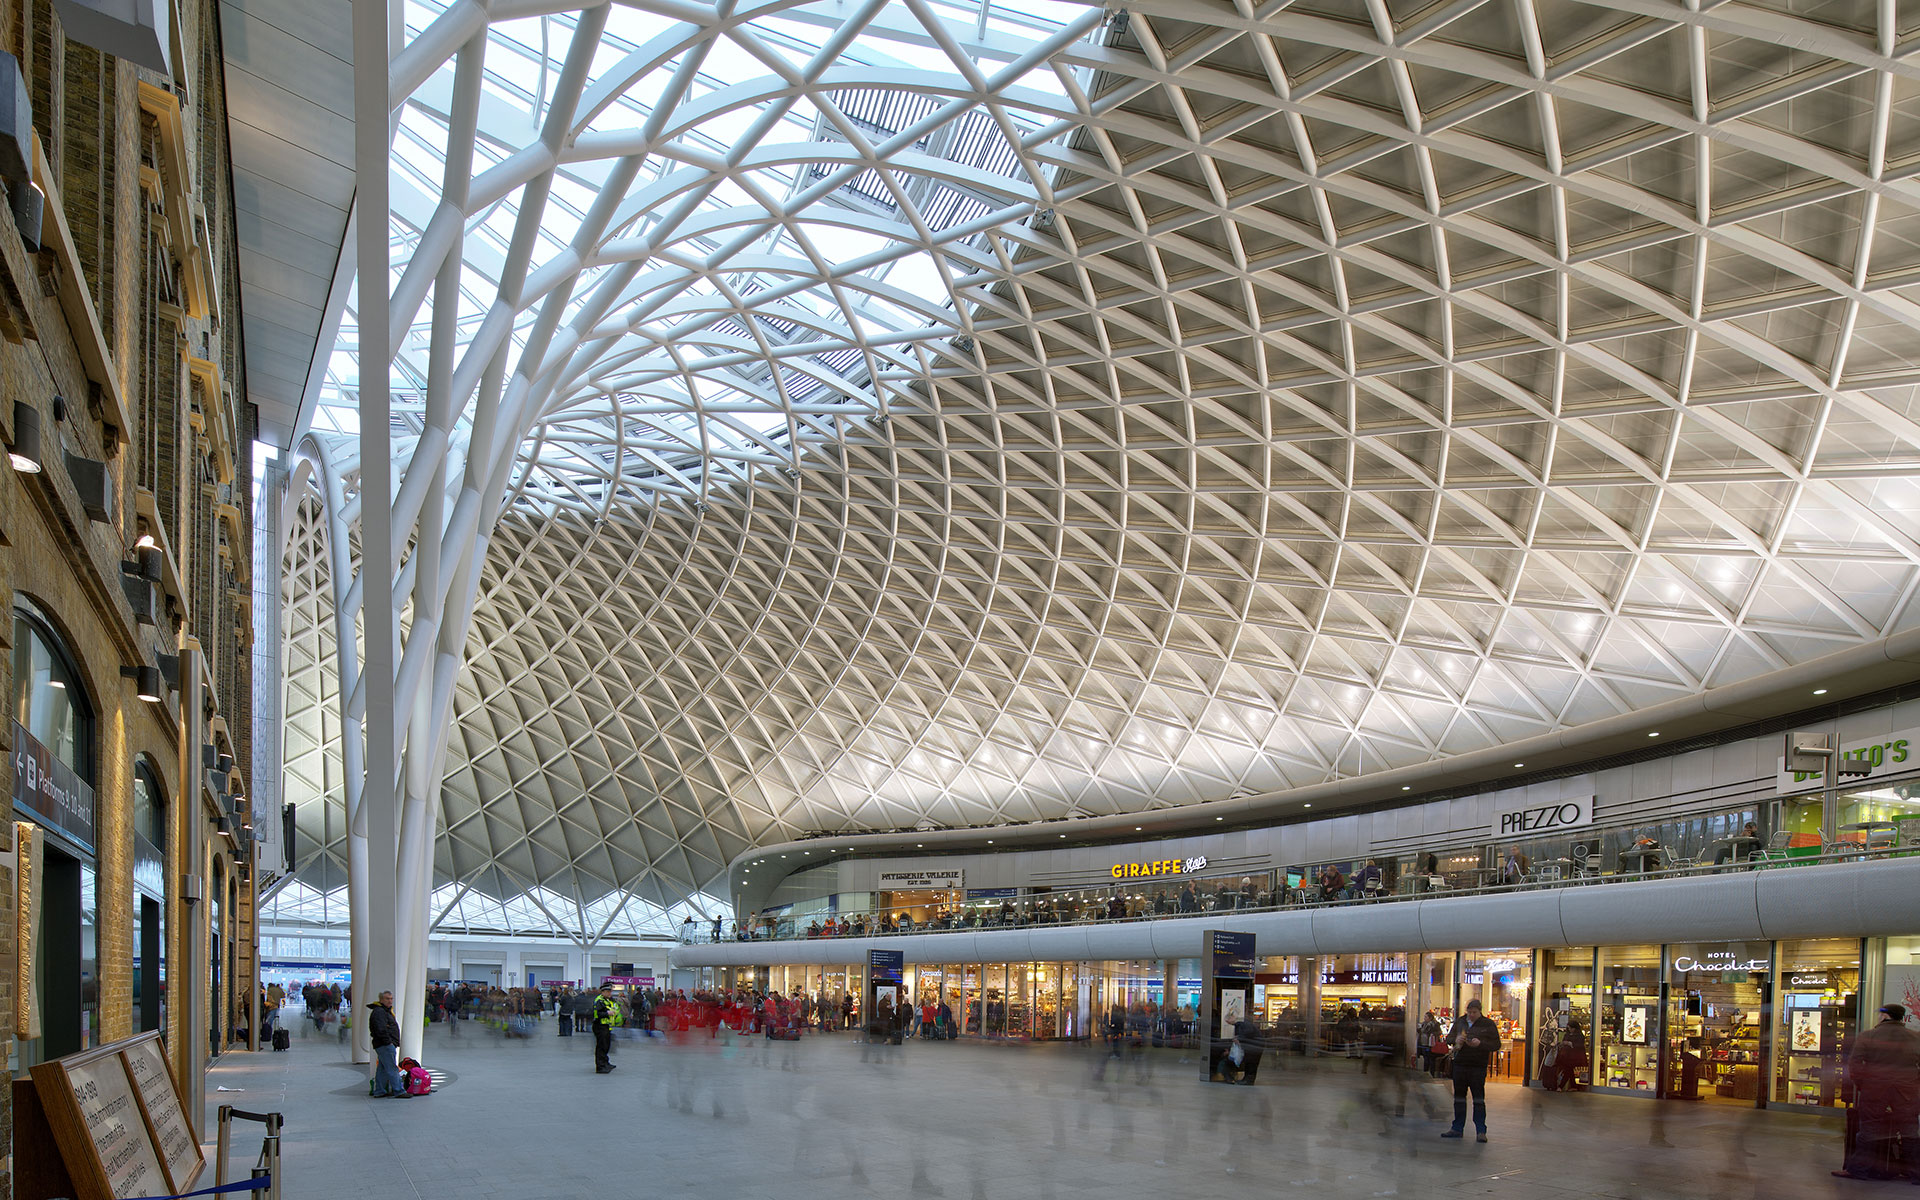 Expect delays on the East Coast Main Line from London's King’s Cross station (photo © Rob van Esch / dreamstime.com)